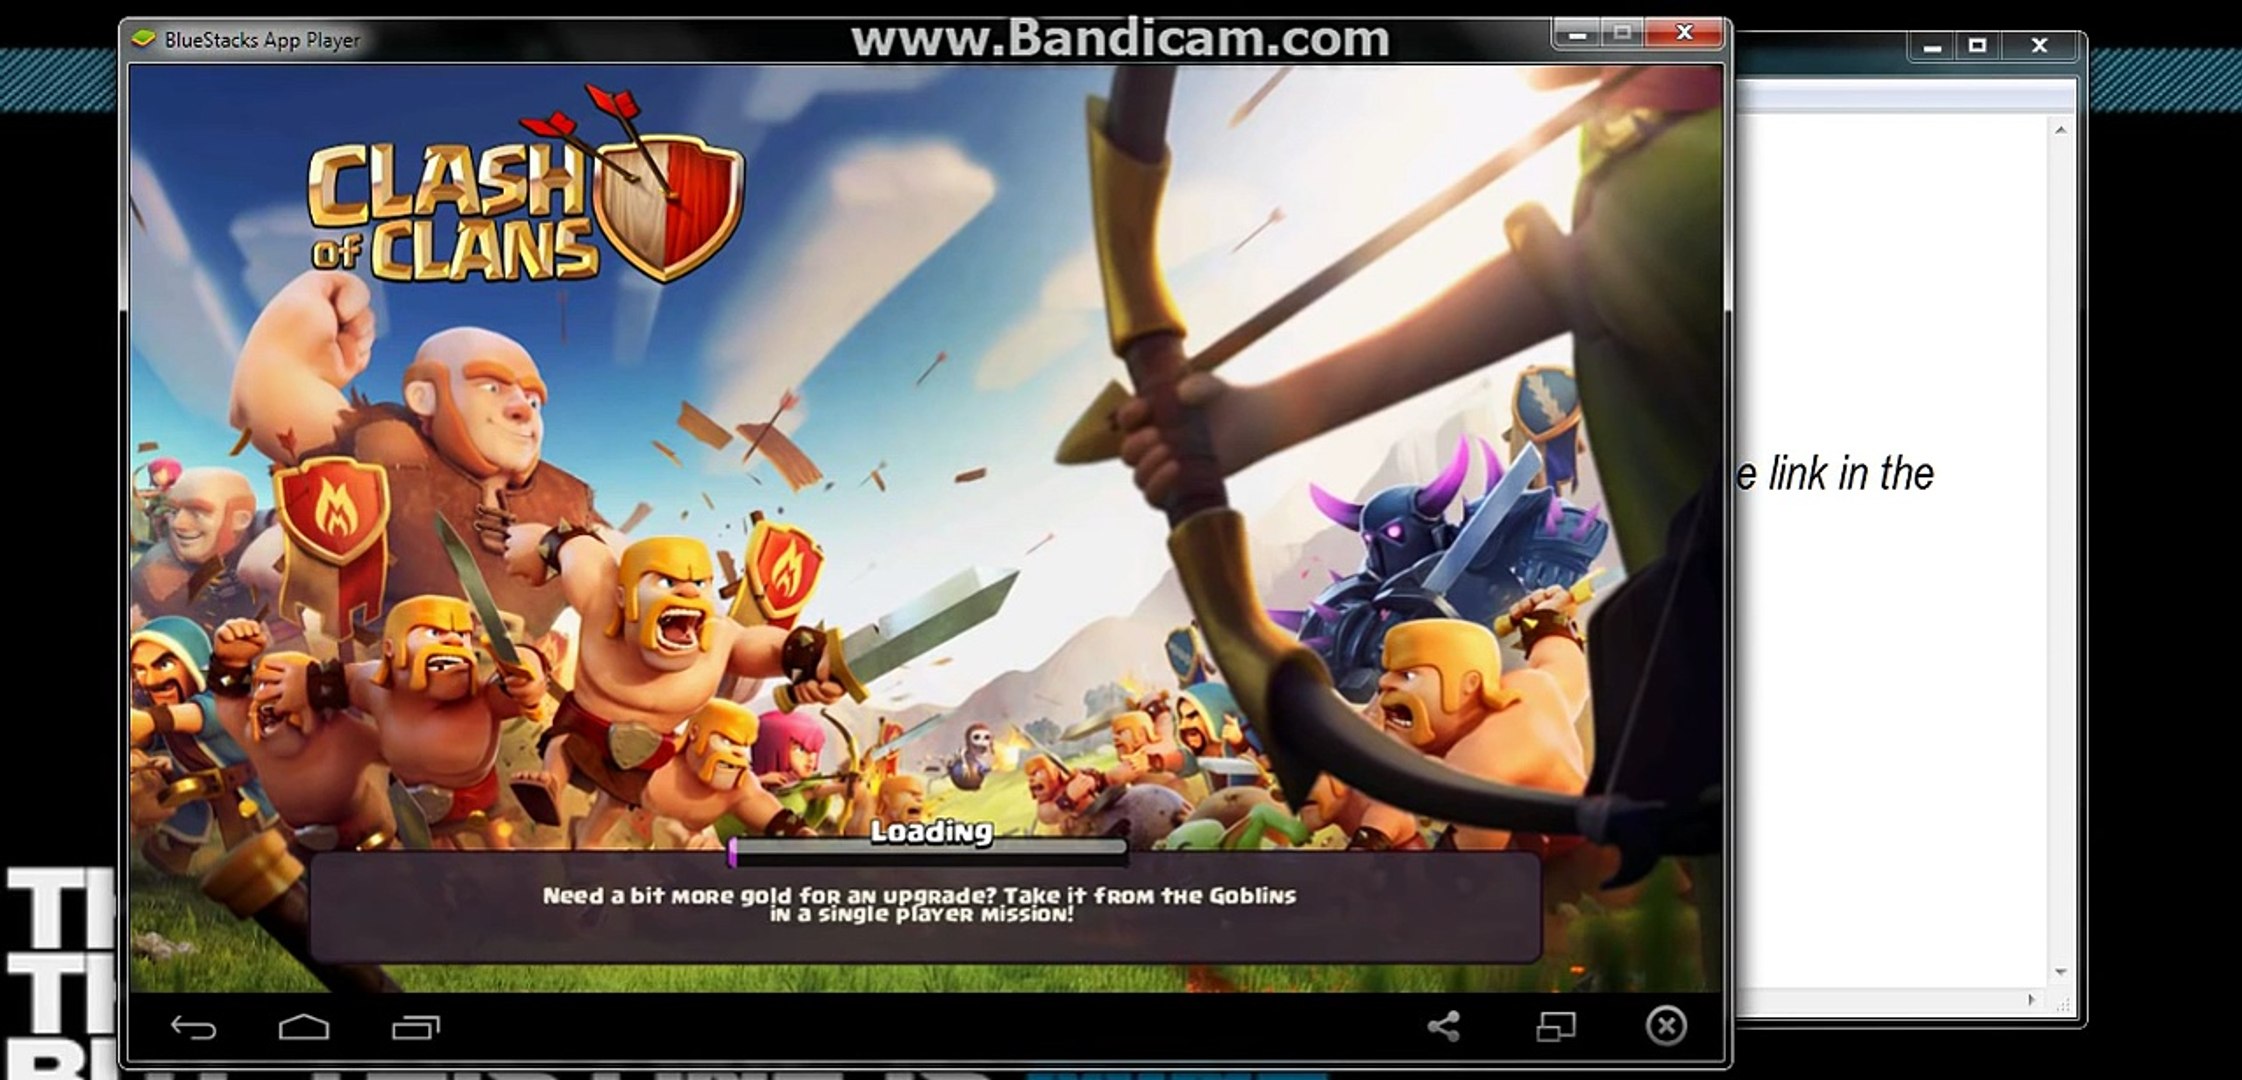 How To Hack Clash Of Clans With Cheat Engine 6.1